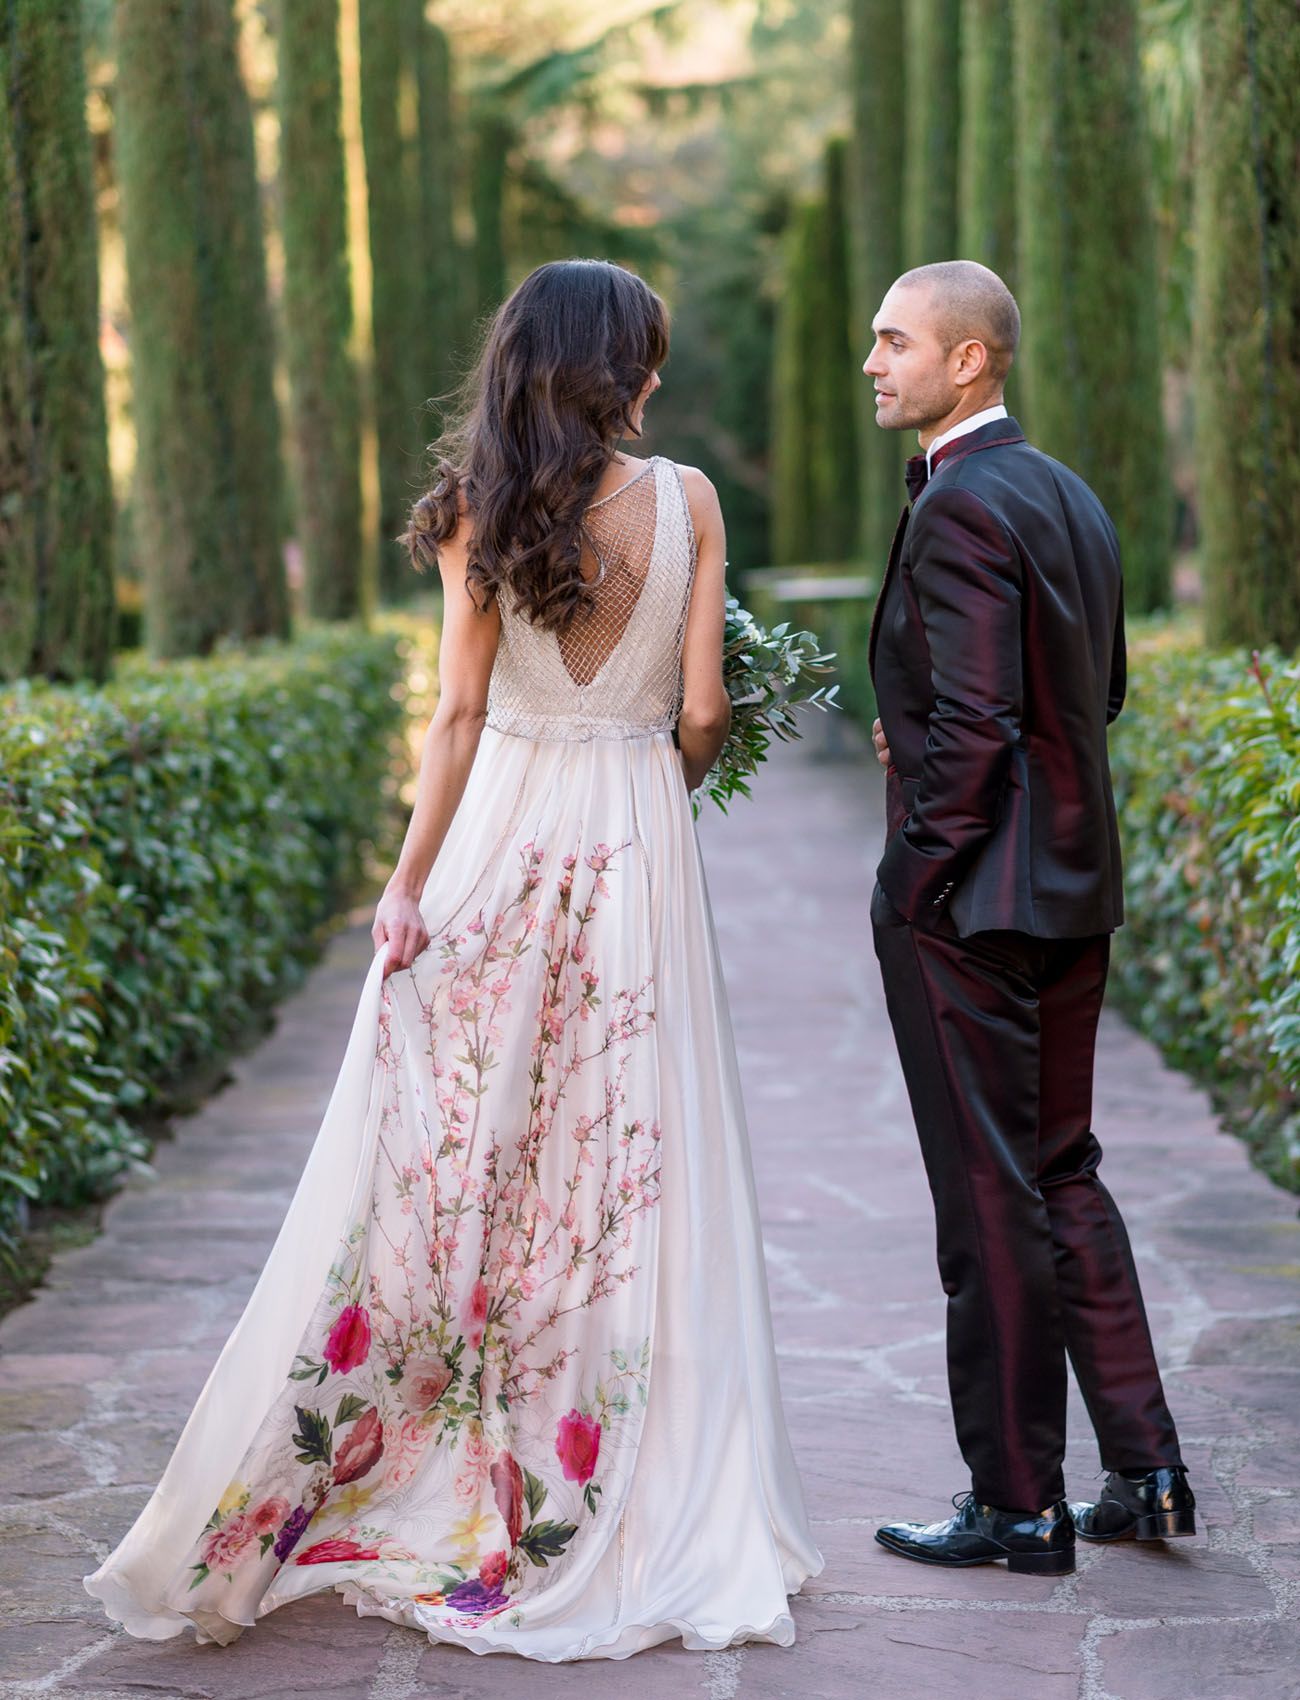 Bold + Romantic Barcelona Wedding Reception with a Floral Dress ...